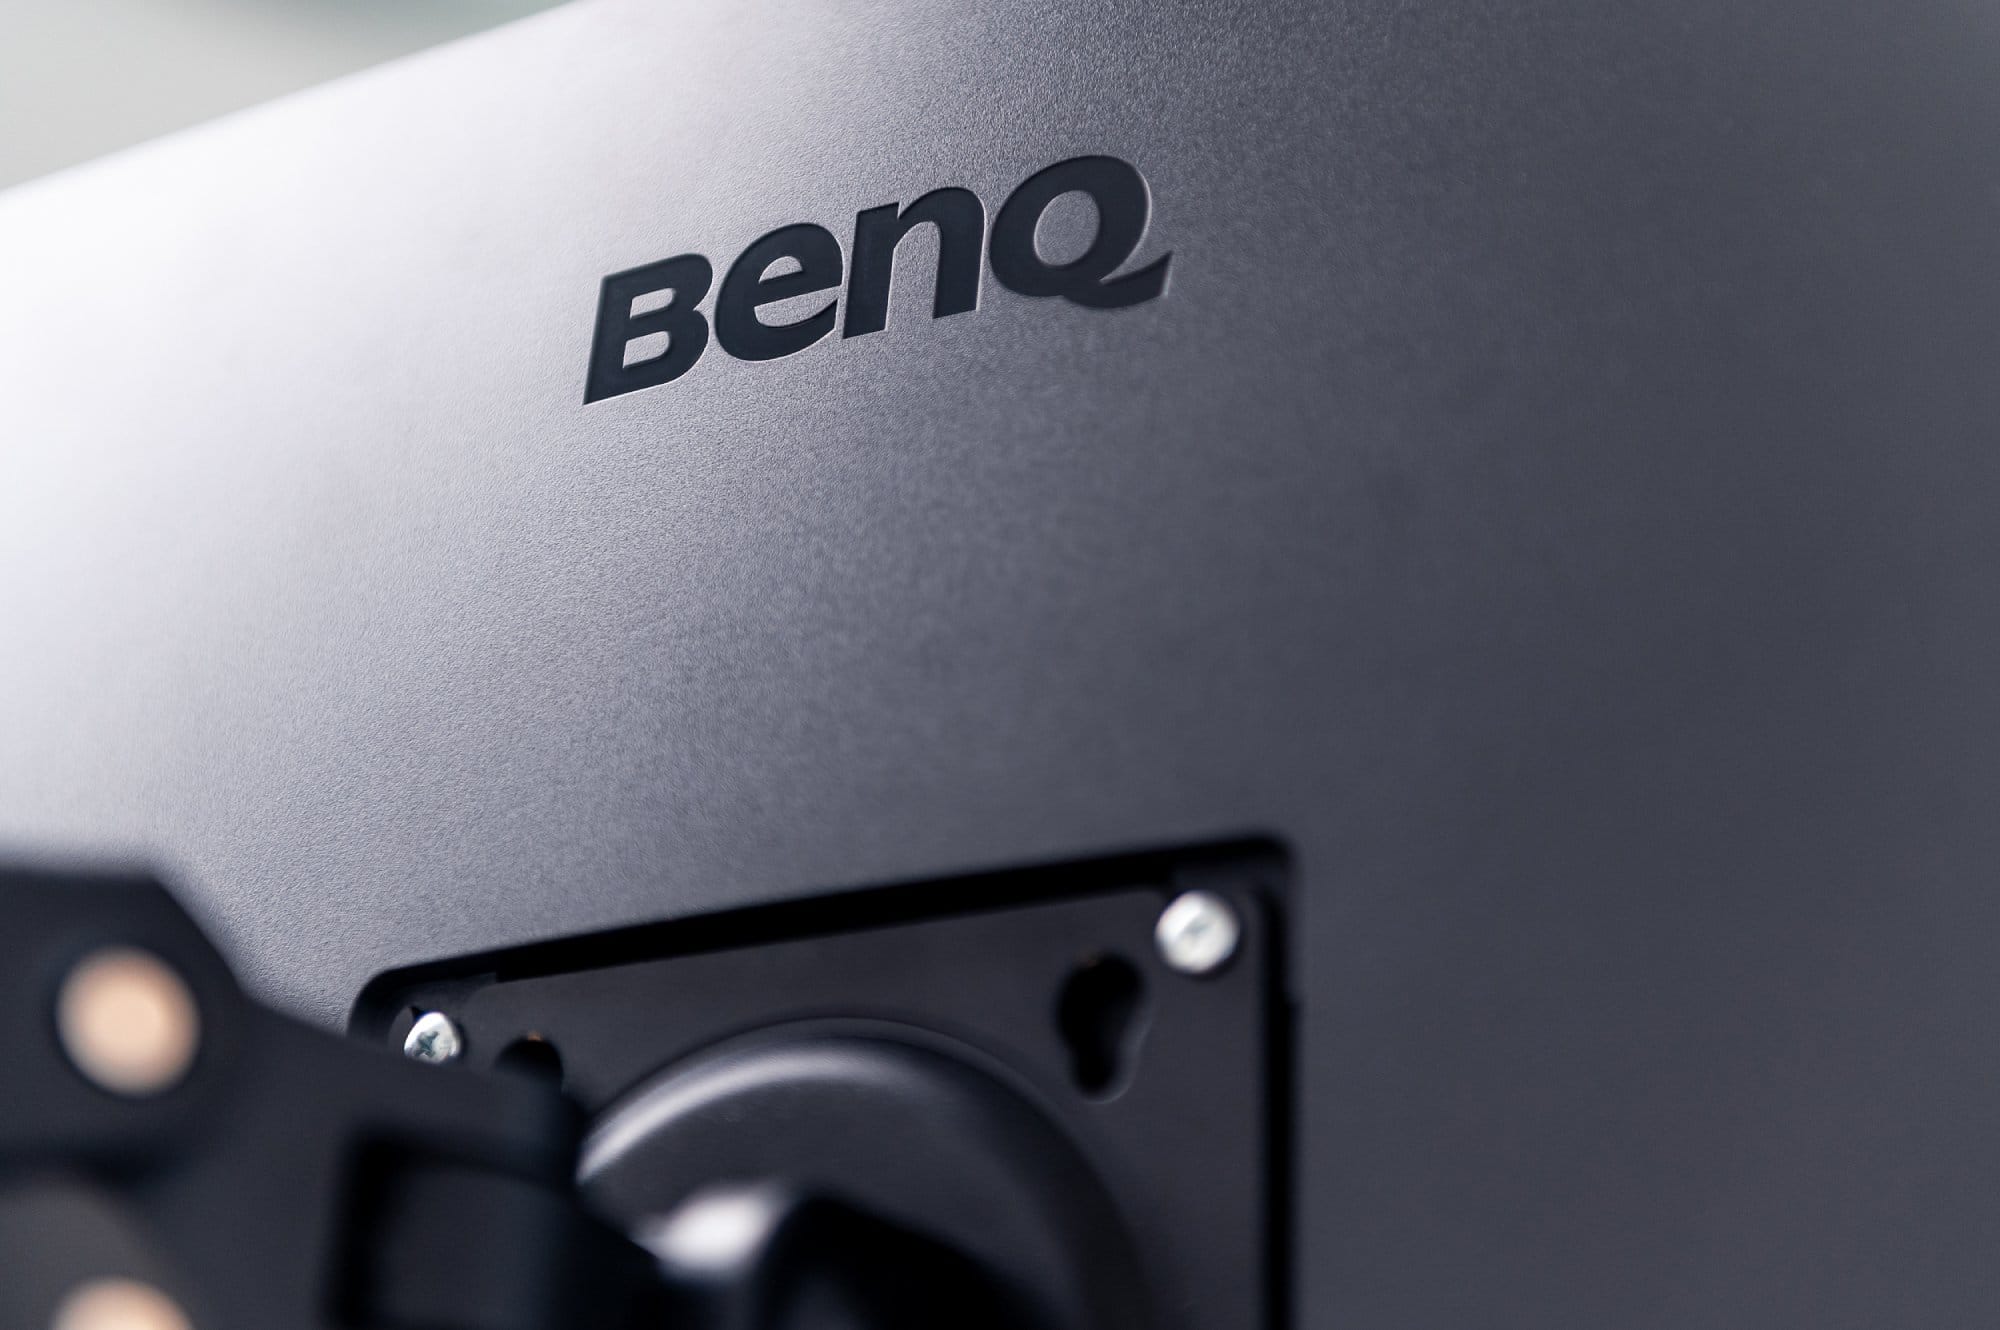 A close-up of the back of a BenQ monitor